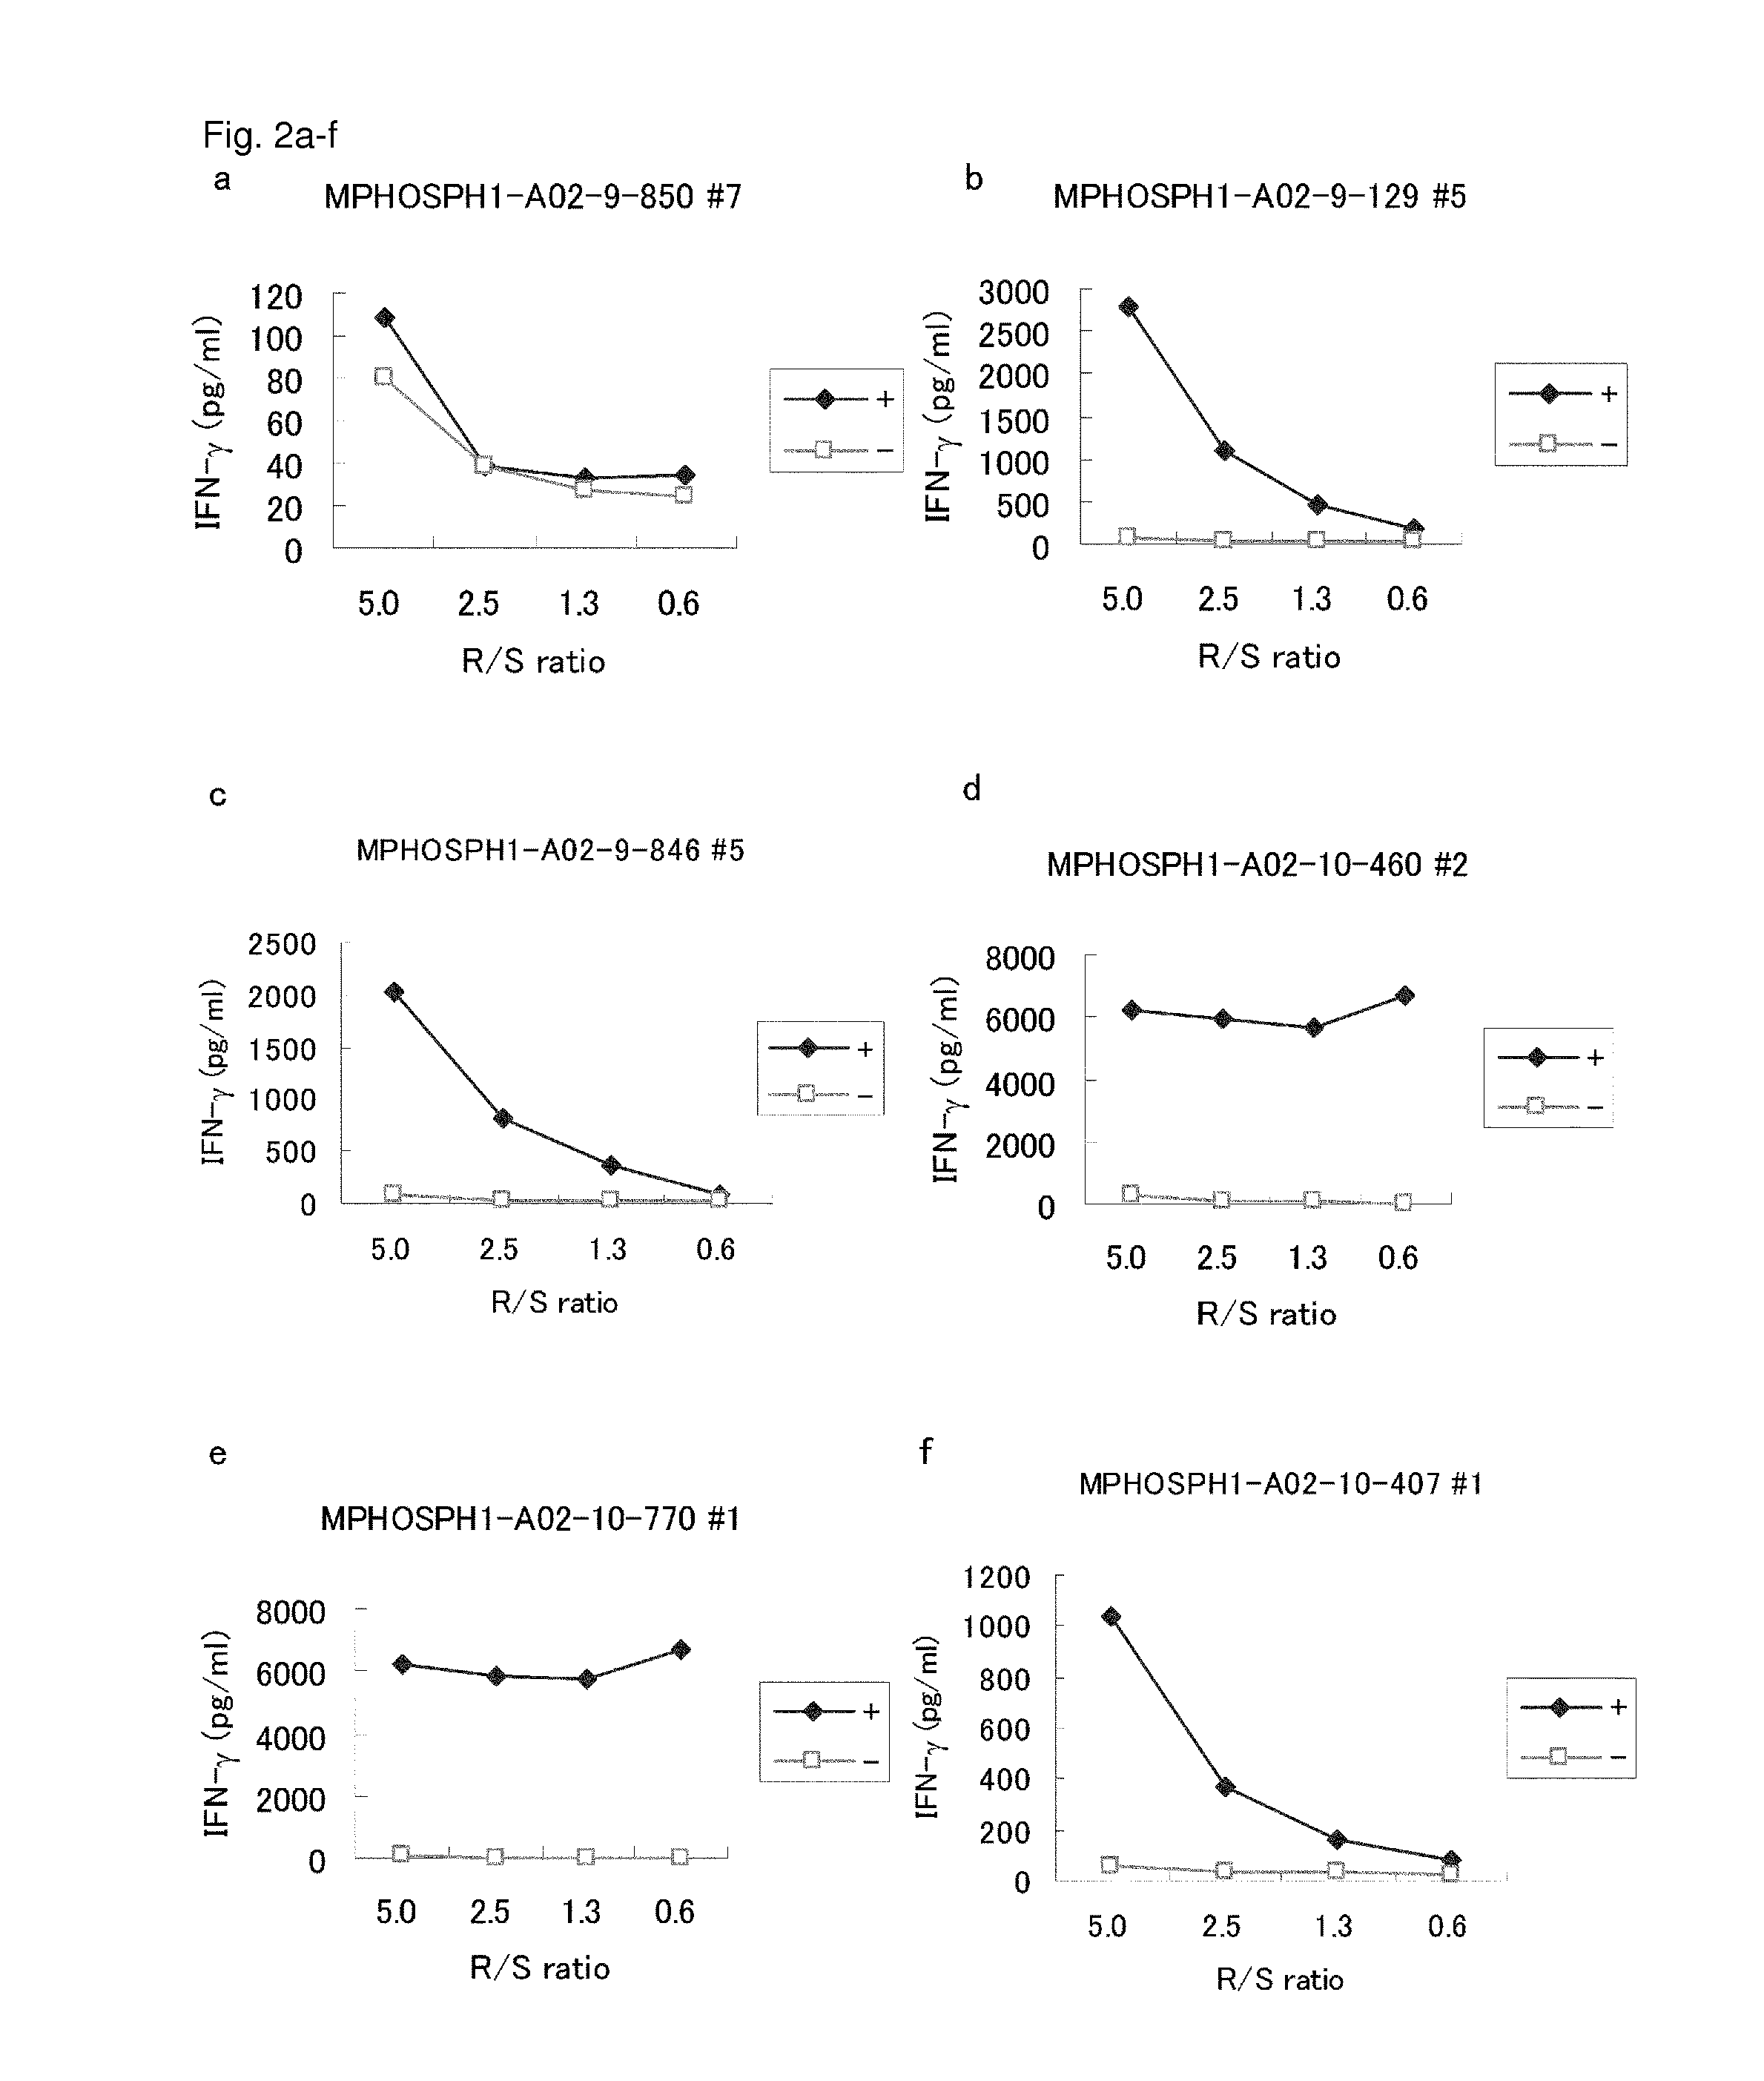 MPHOSPH1 peptides and vaccines including the same